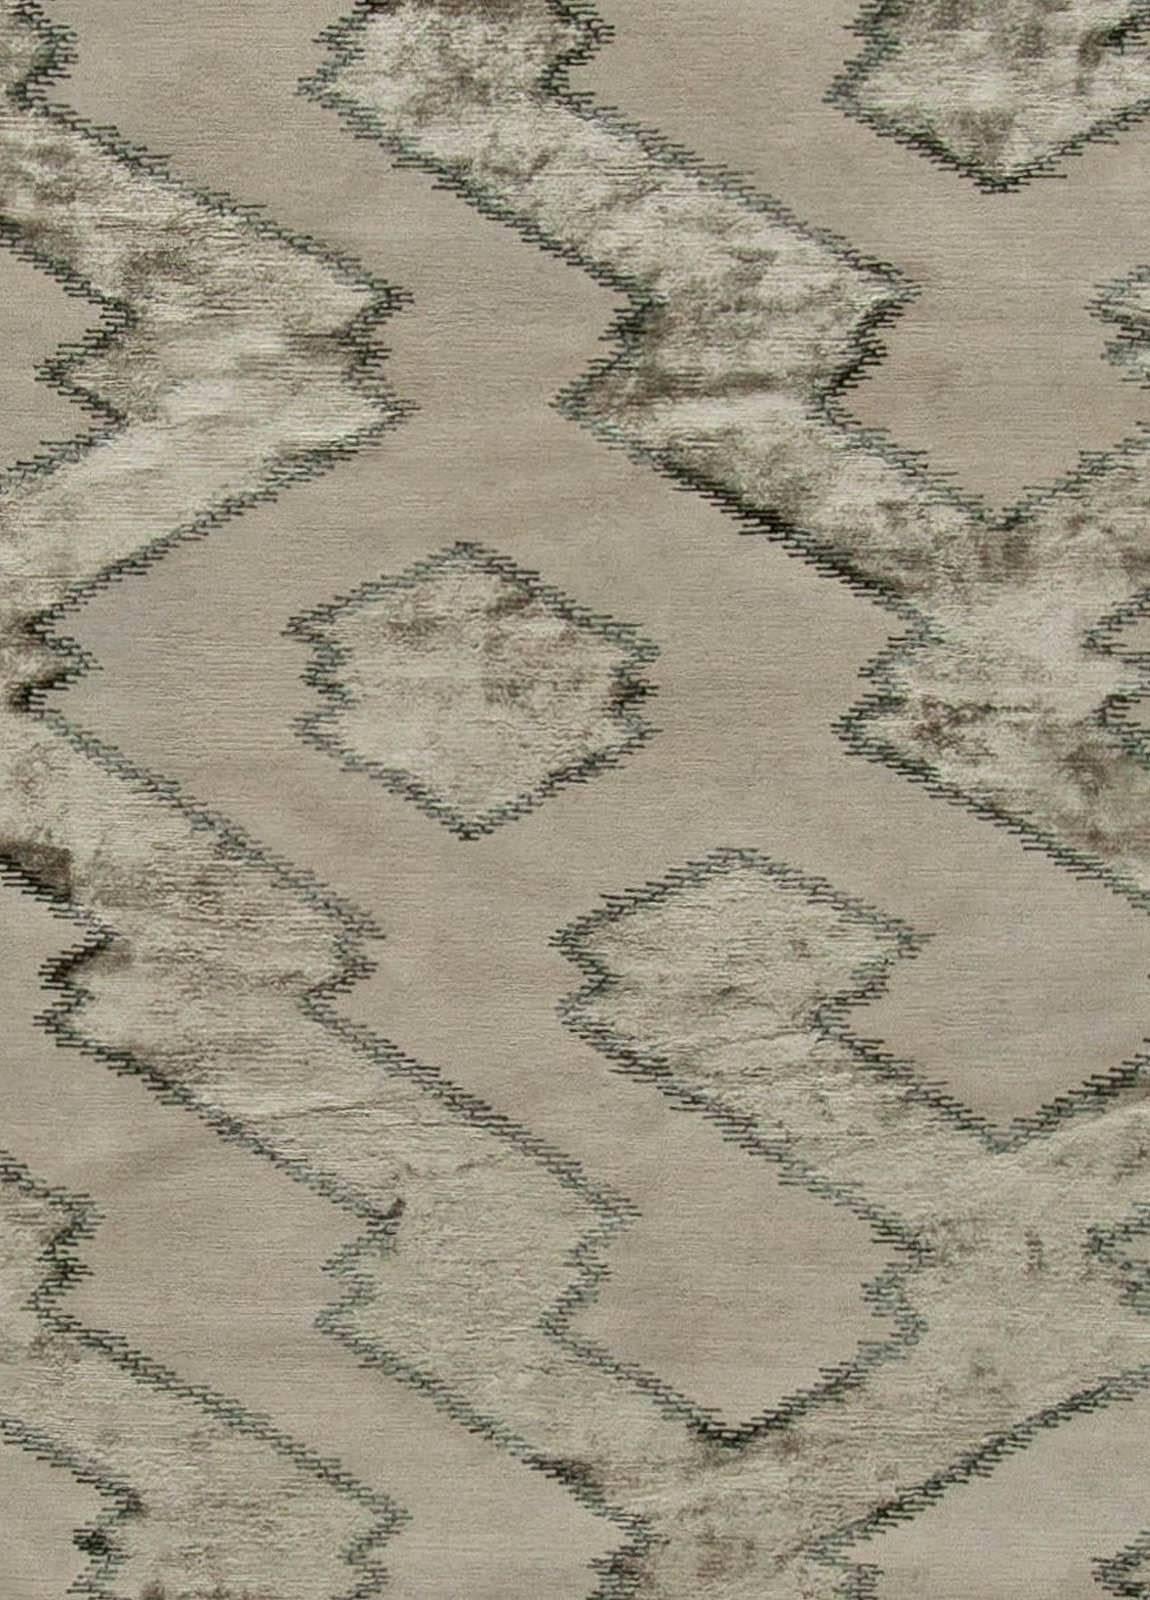 Contemporary silver grey hand knotted wool and silk rug by Doris Leslie Blau
Size: 12.1